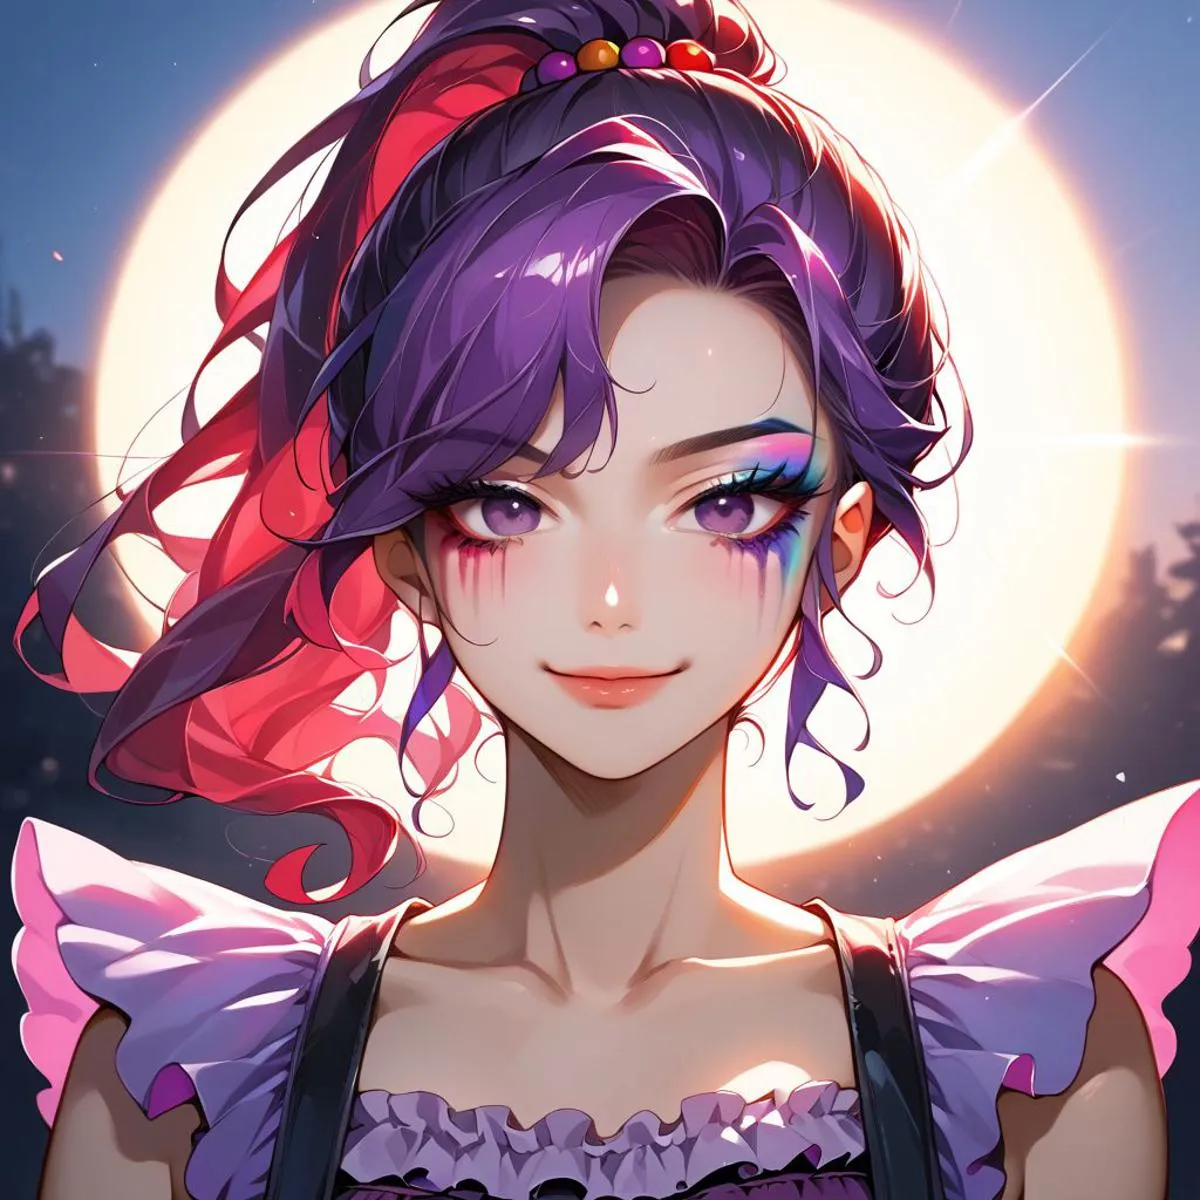 Anime style girl with purple and pink hair, colorful makeup, and a ruffled dress in front of a glowing moon. AI generated image using Stable Diffusion.